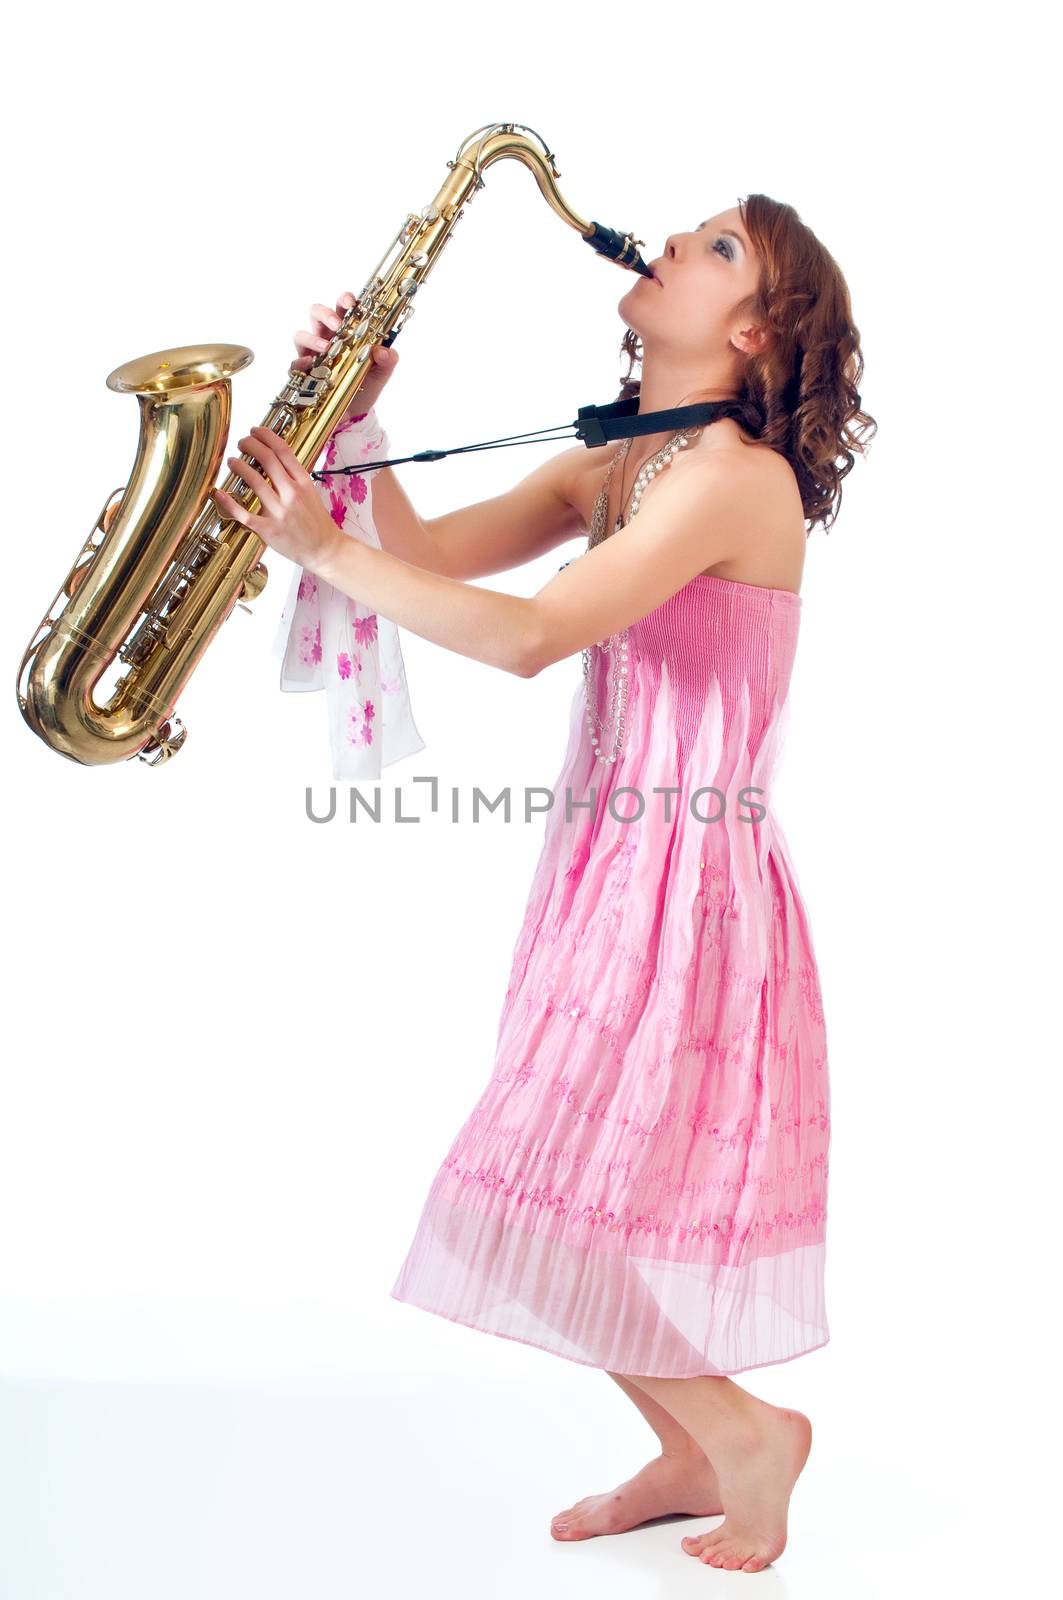 Barefoot girl playing jazz on a tenor saxophone against a white background.